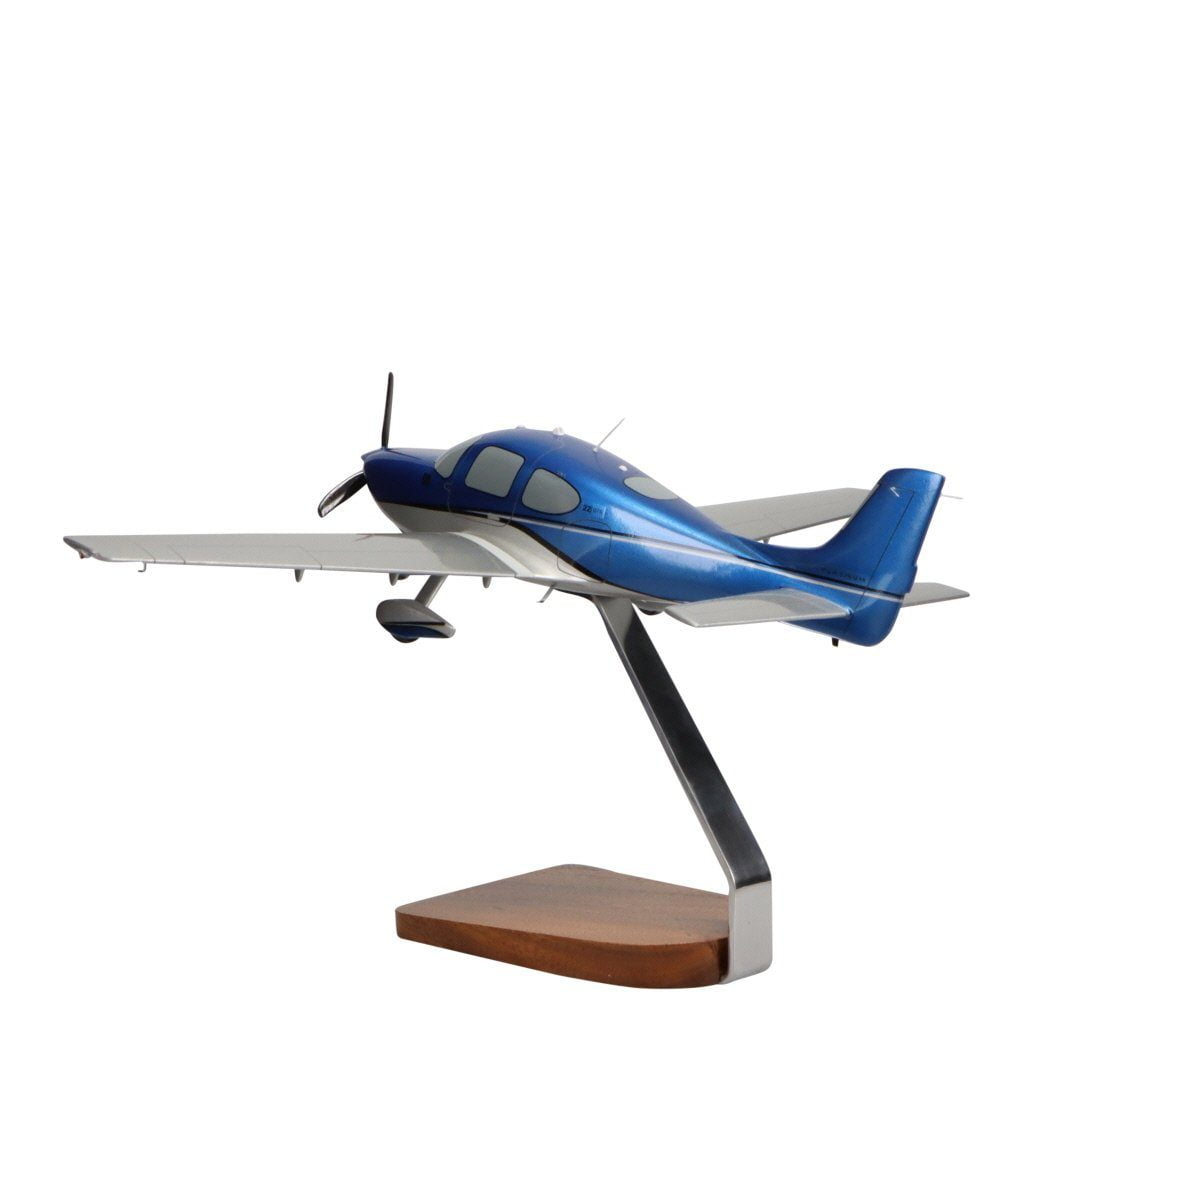 High Flying Models Cirrus SR22 Clear Canopy Limited Edition Large Mahogany Model